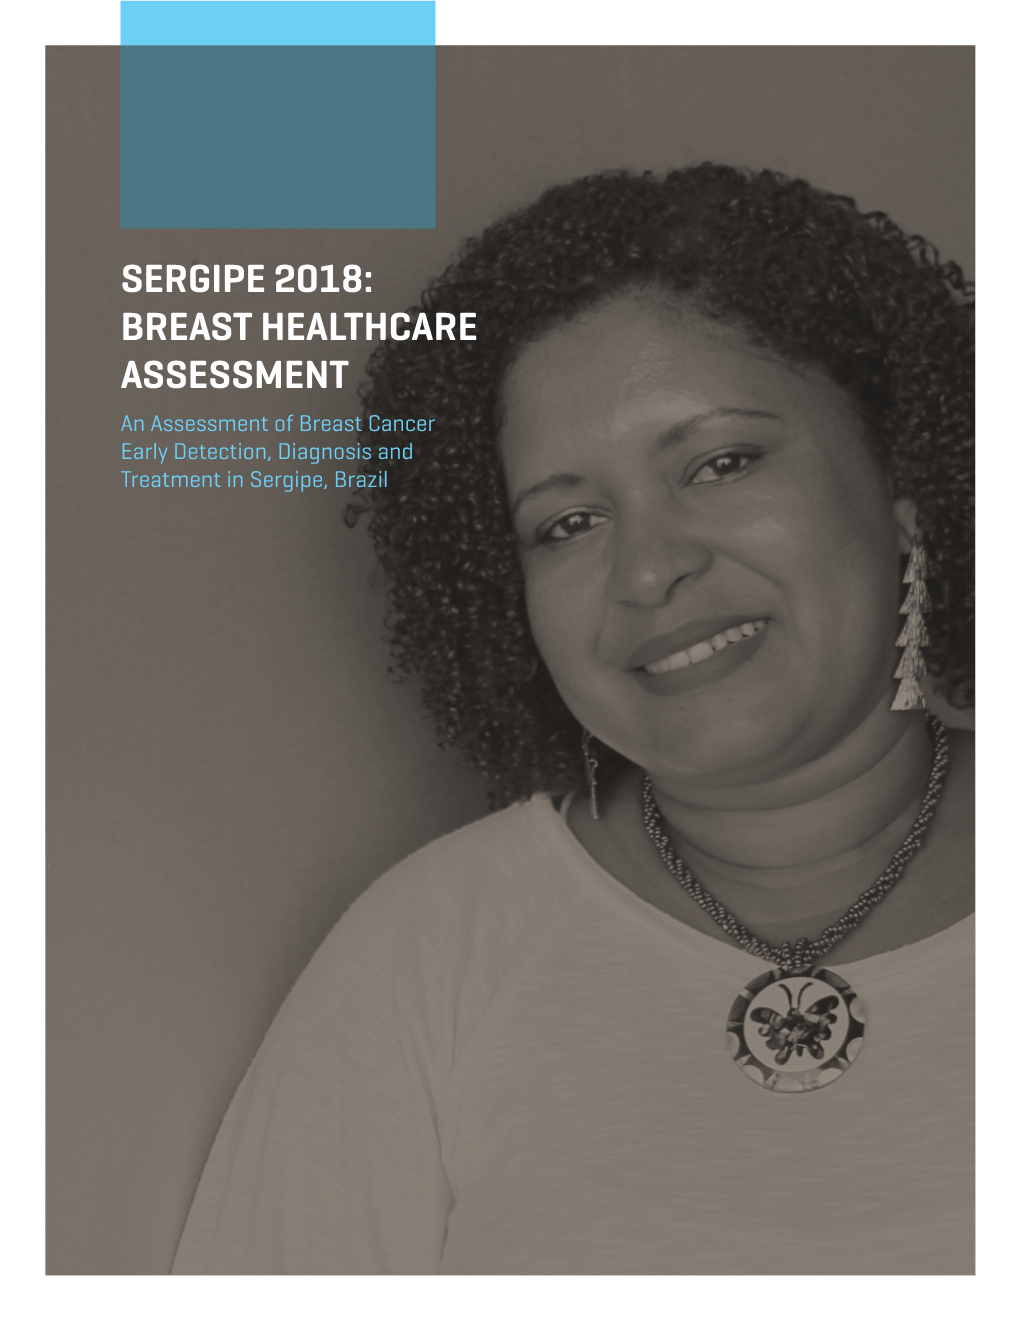 SERGIPE 2018: BREAST HEALTHCARE ASSESSMENT an Assessment of Breast Cancer Early Detection, Diagnosis and Treatment in Sergipe, Brazil